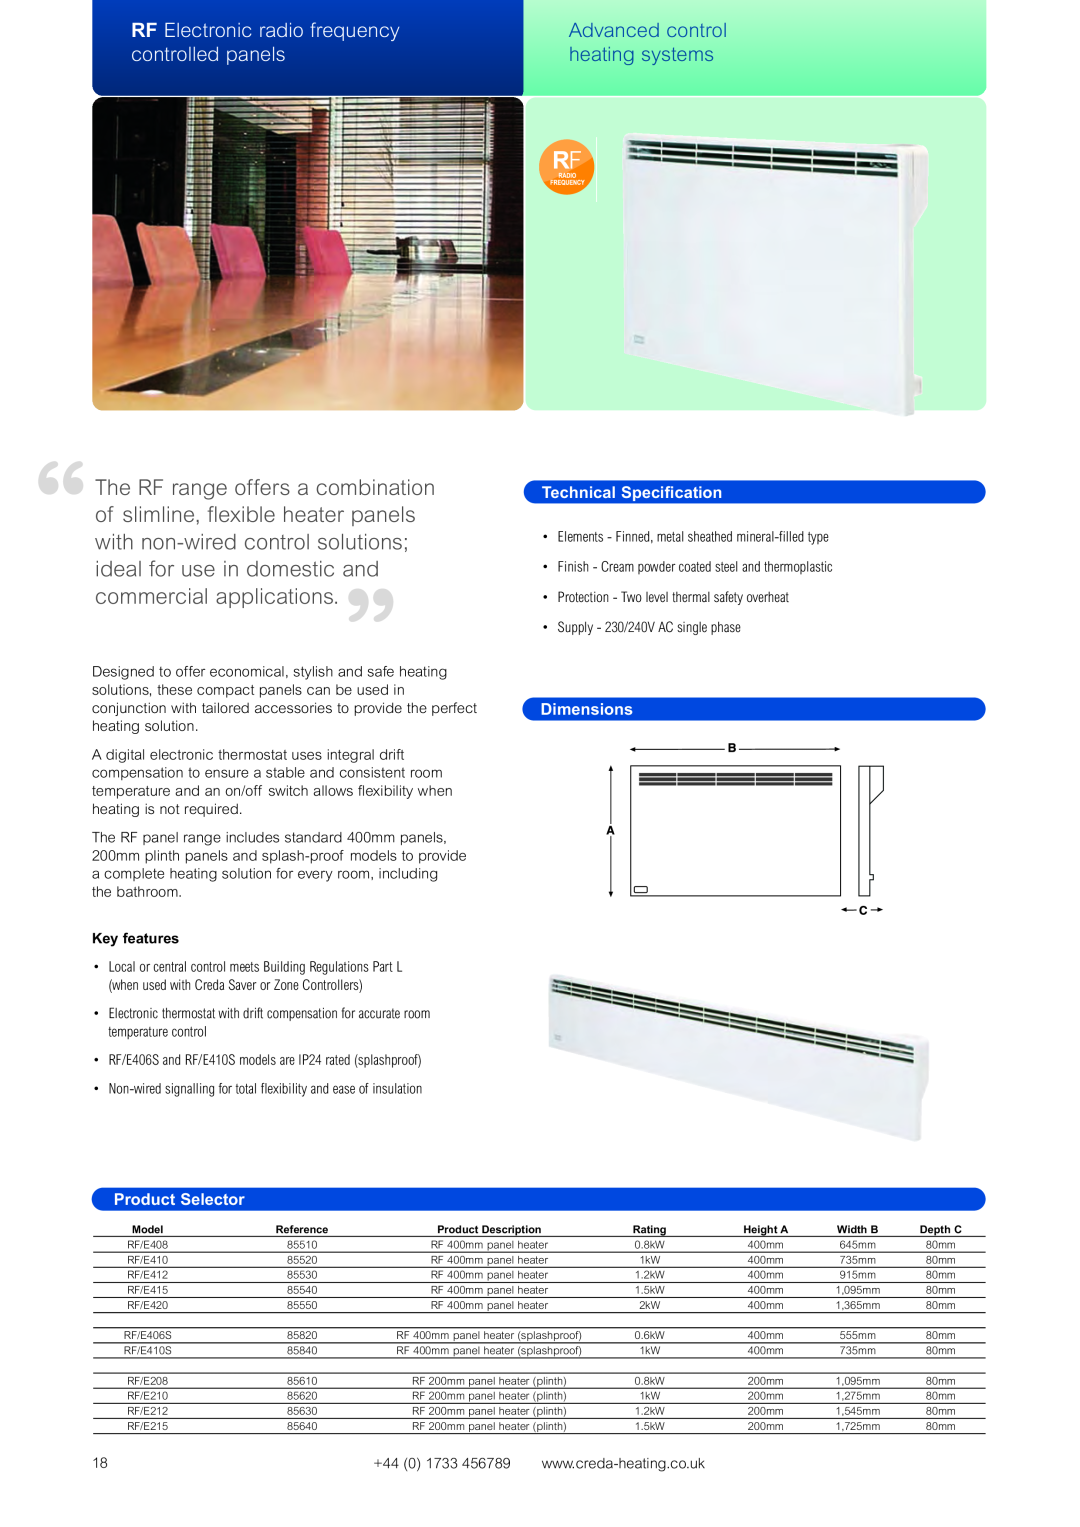 Creda Heating Solution RF Electronic radio frequency, Advanced control, controlled panels, heating systems, Dimensions 